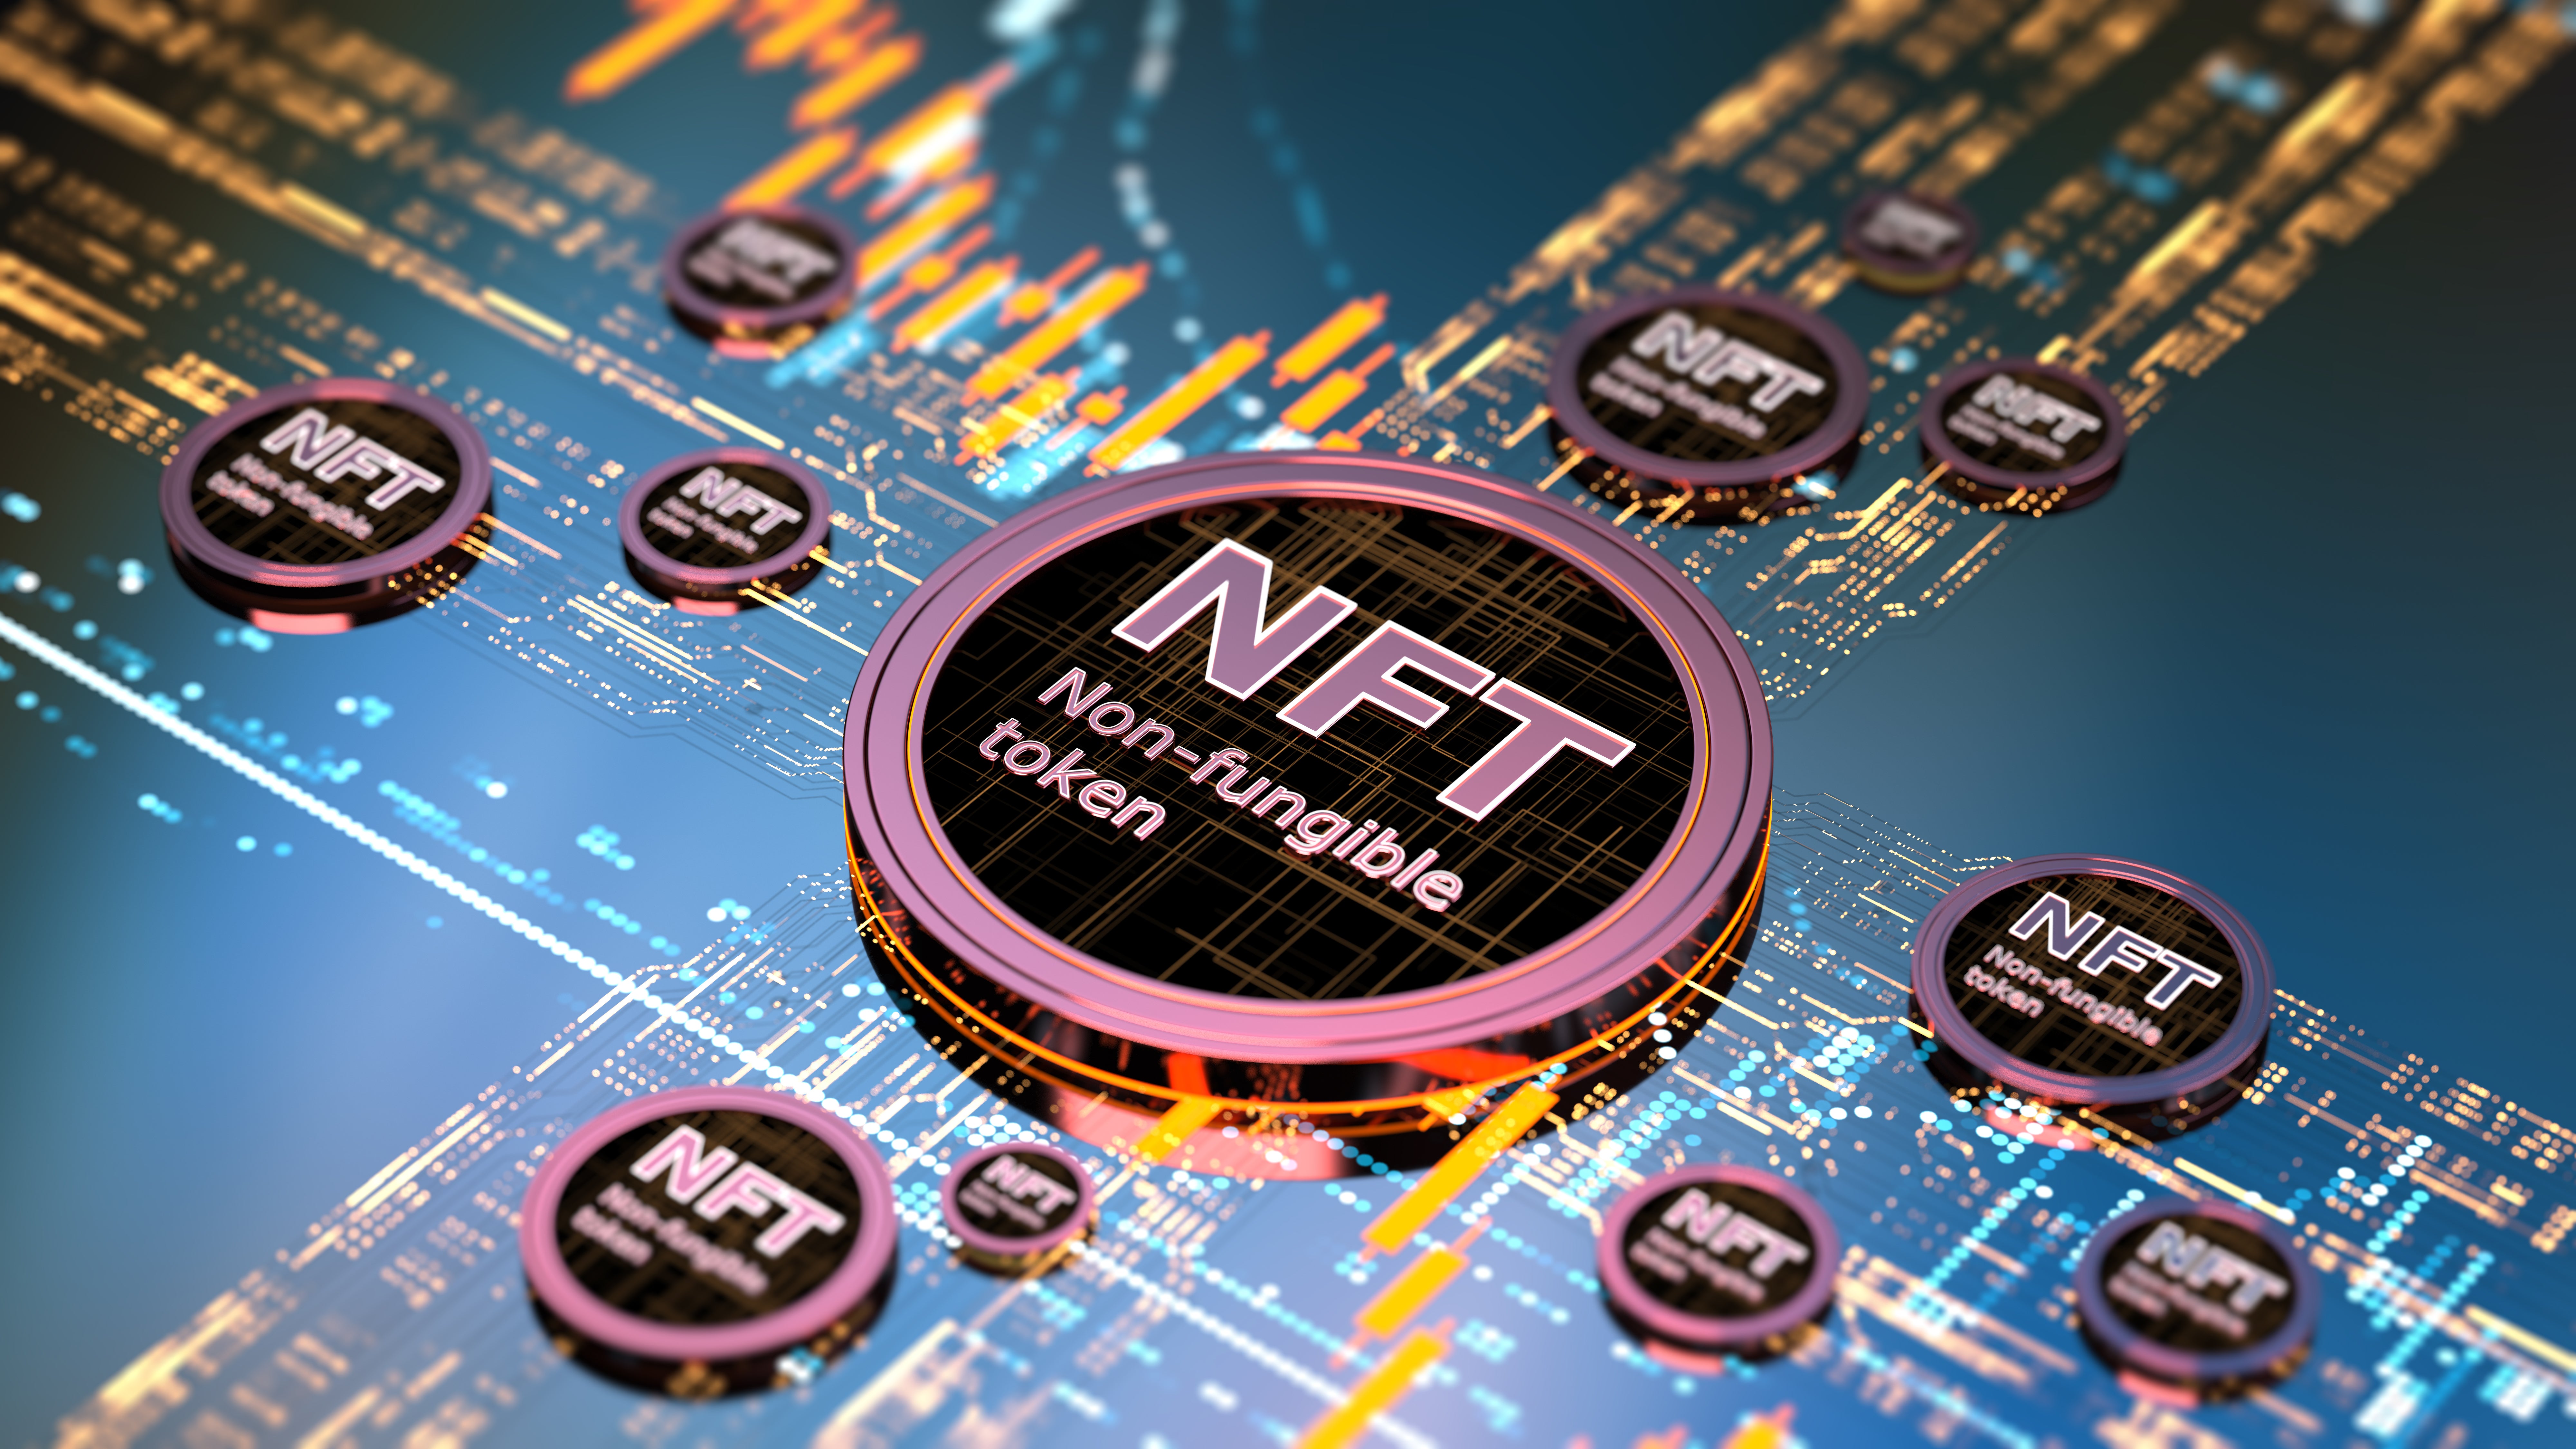 NFTs and blockchains, like any technology, can have a variety of uses